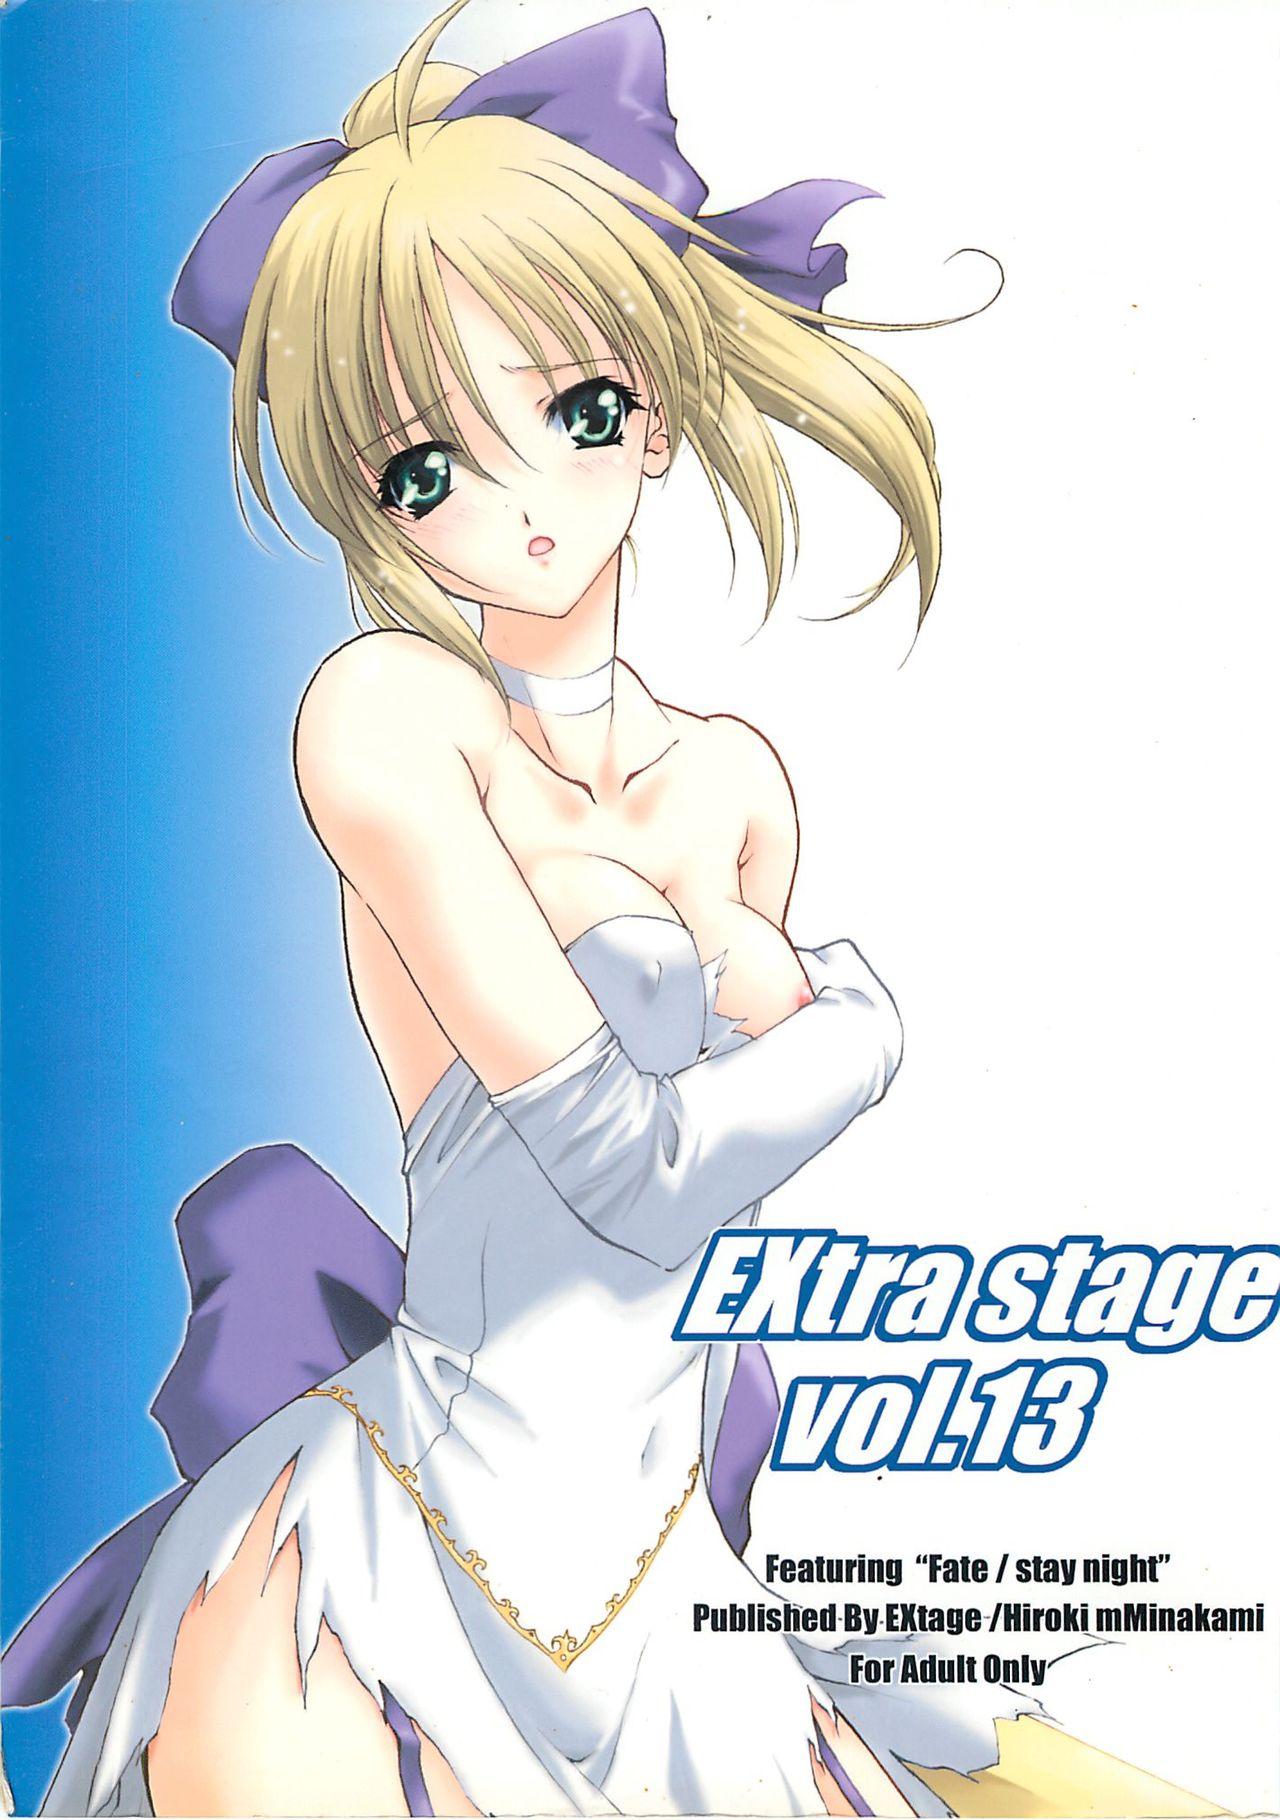 Lolicon EXtra stage vol. 13 - Fate stay night Blackwoman - Page 1